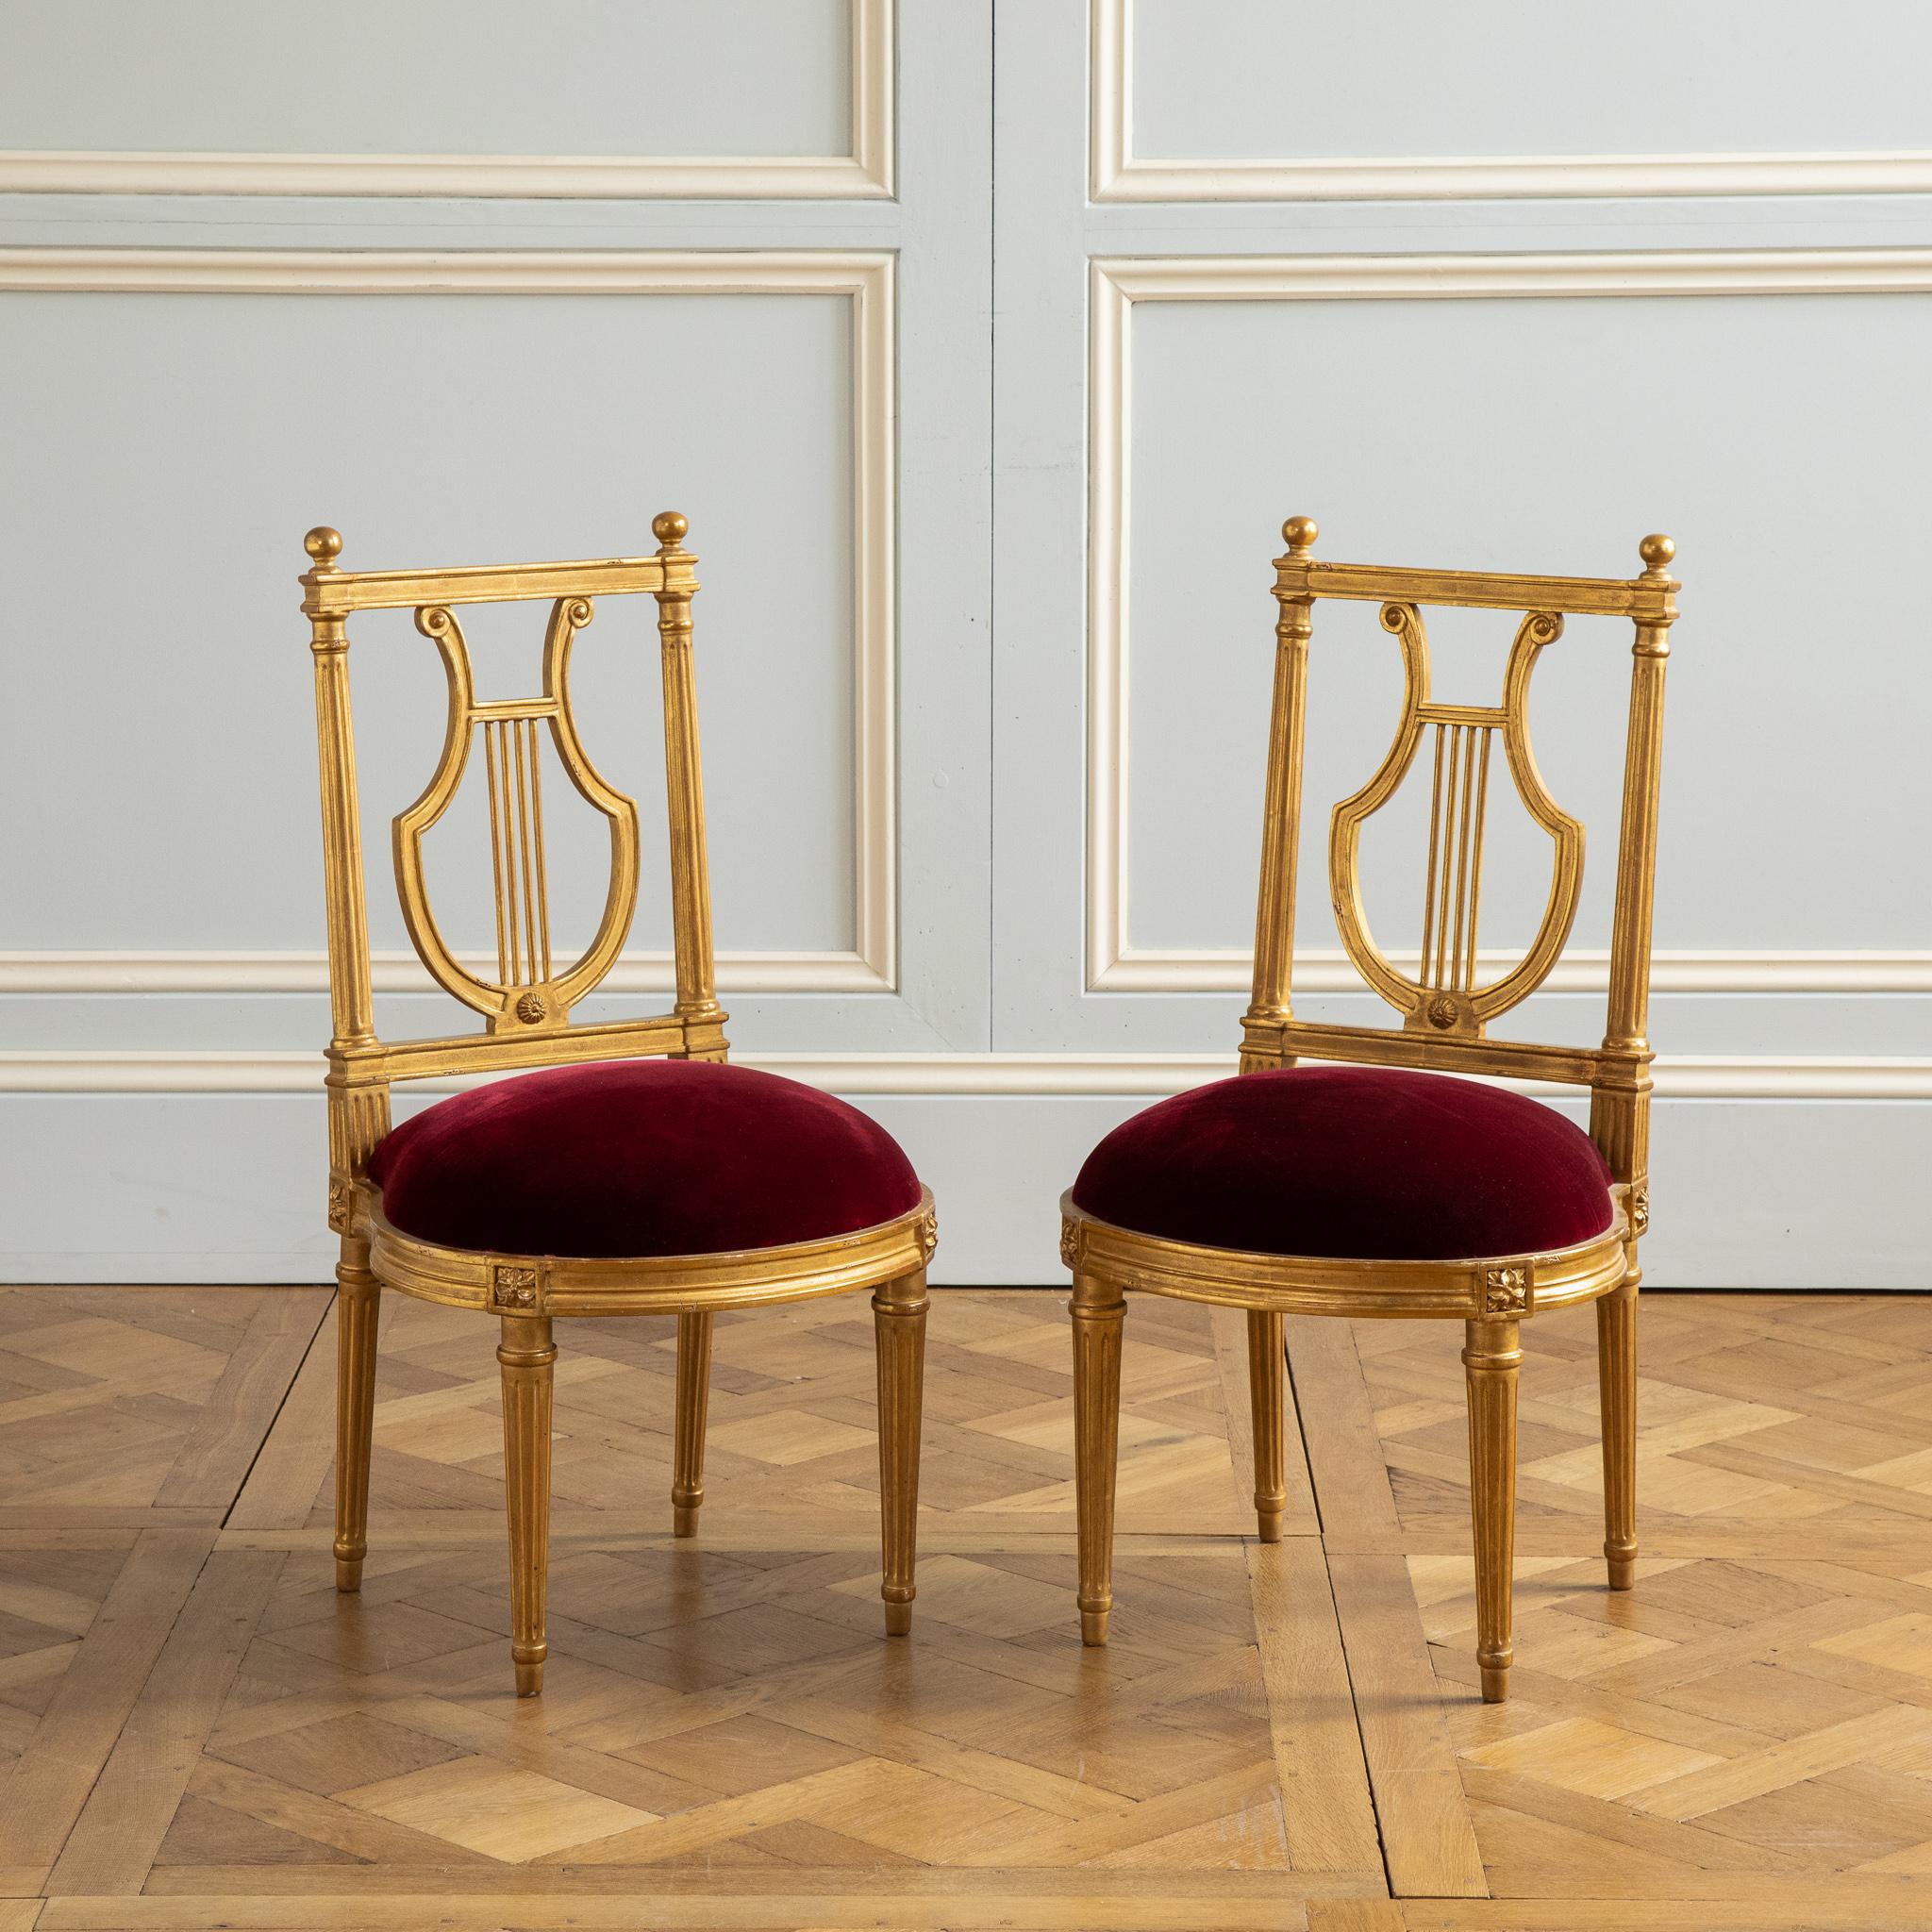 Louis XVI Gilded Lyre Chairs with Deep Red Velvet Inspired by Jacob For Sale 2